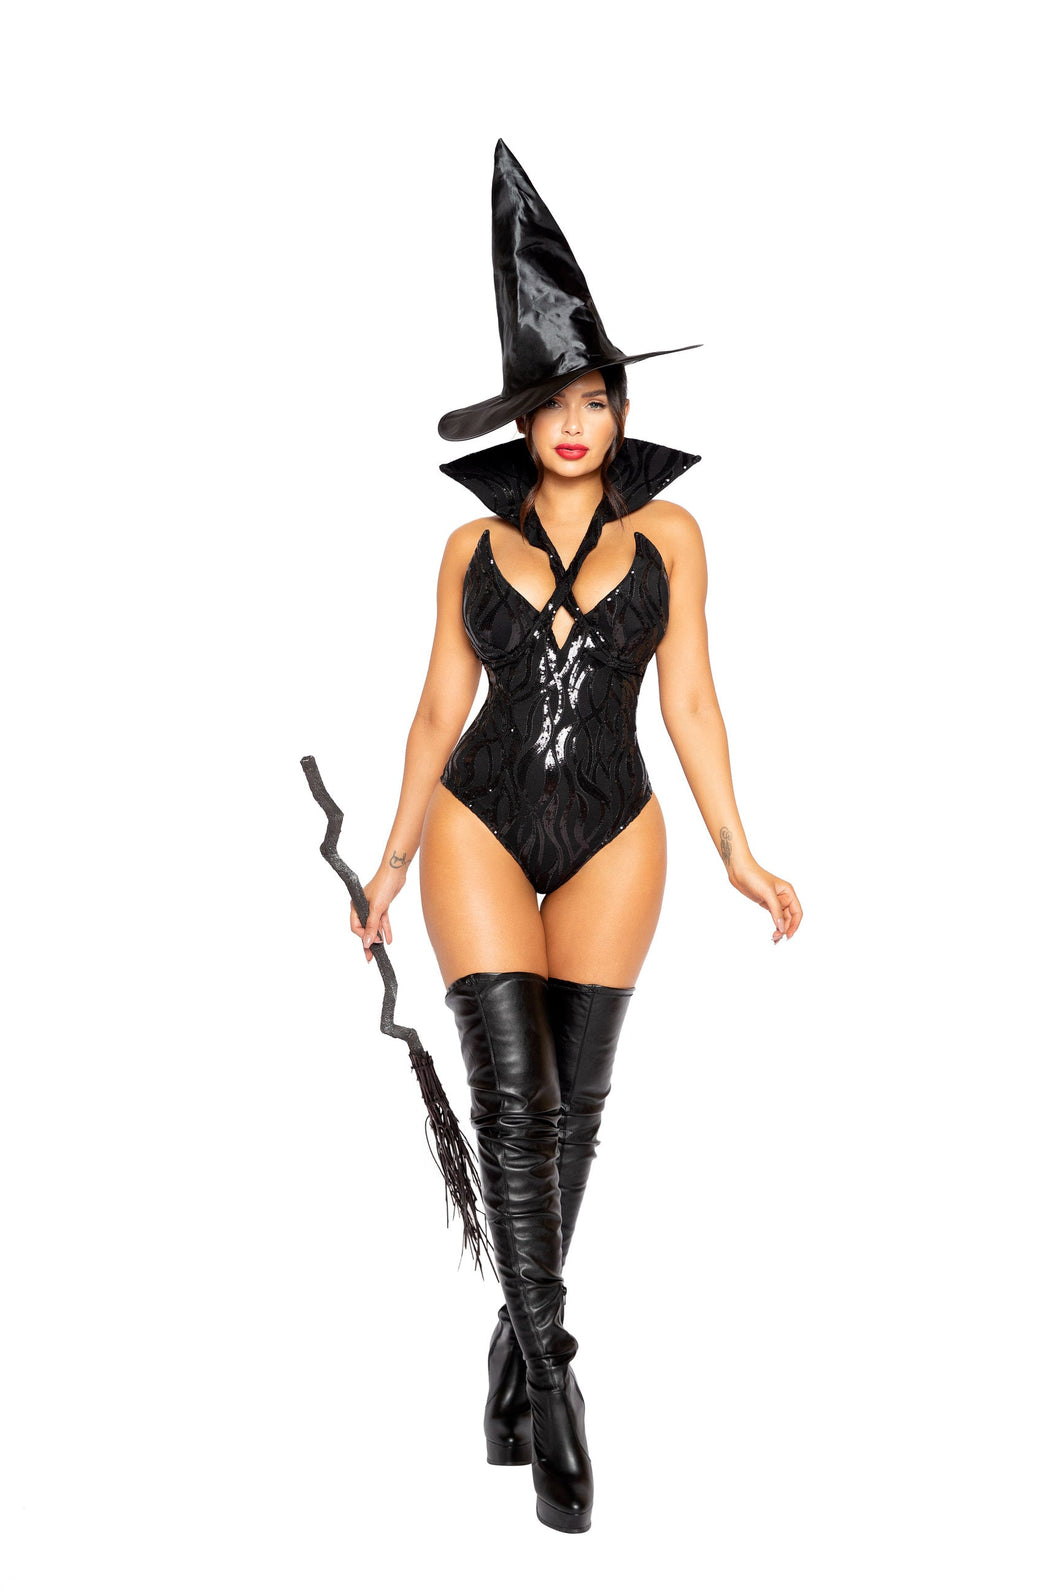 4964 - 2pc Wicked Witch